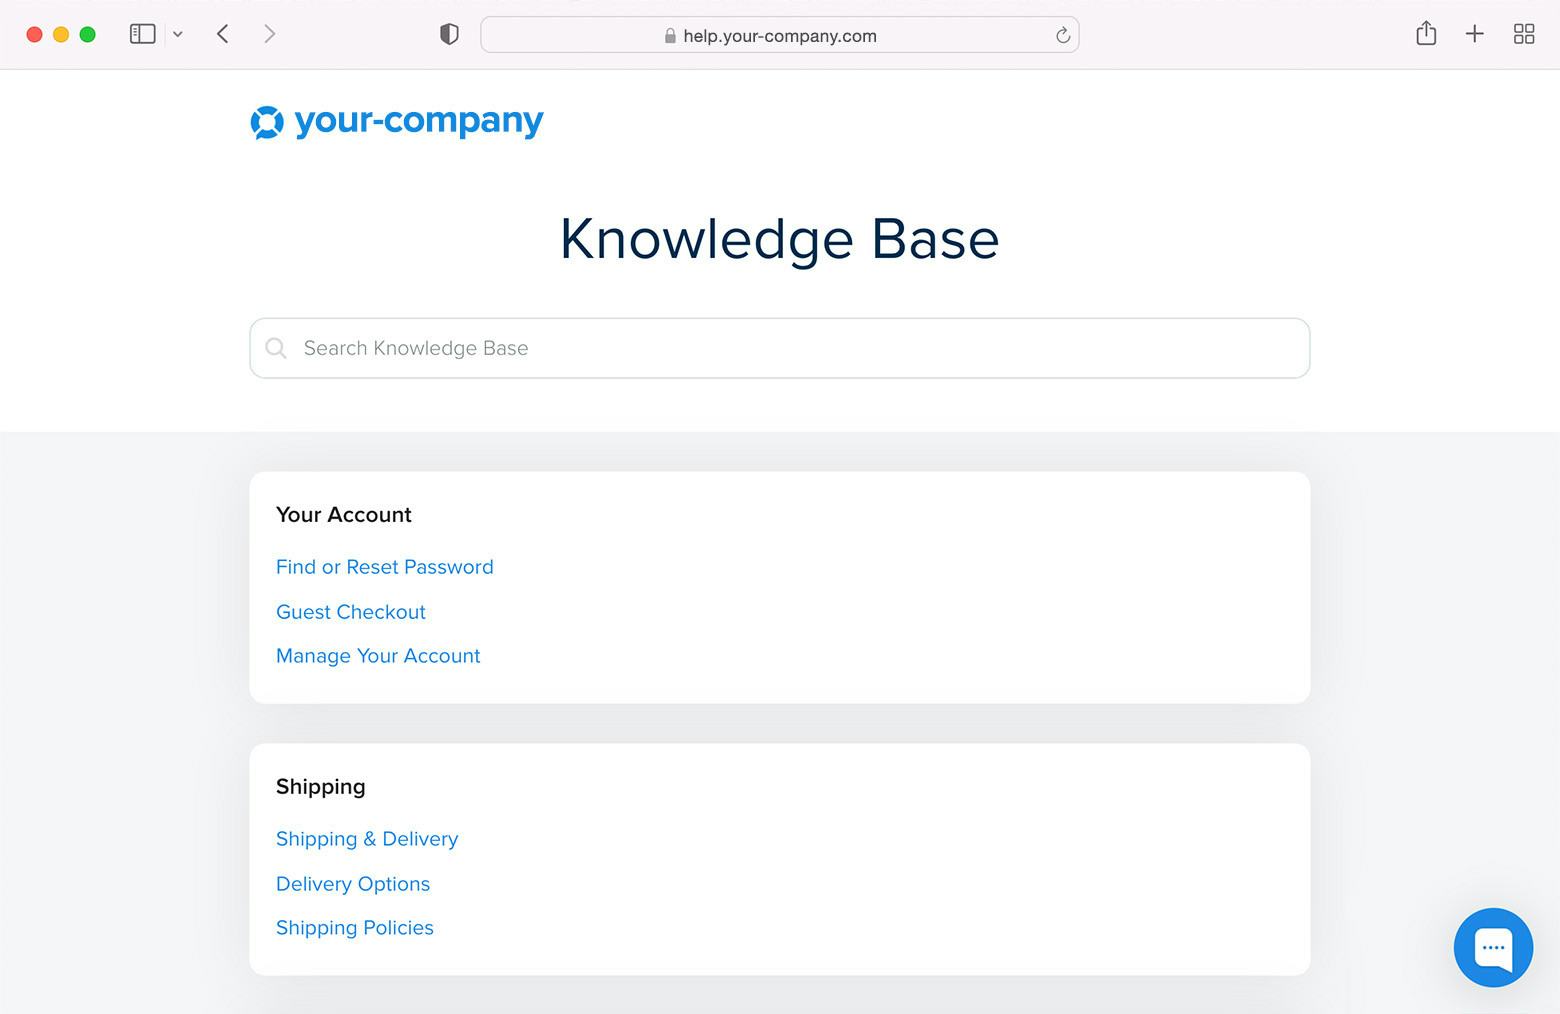 Chaport Software - Create a public knowledge base for your customers